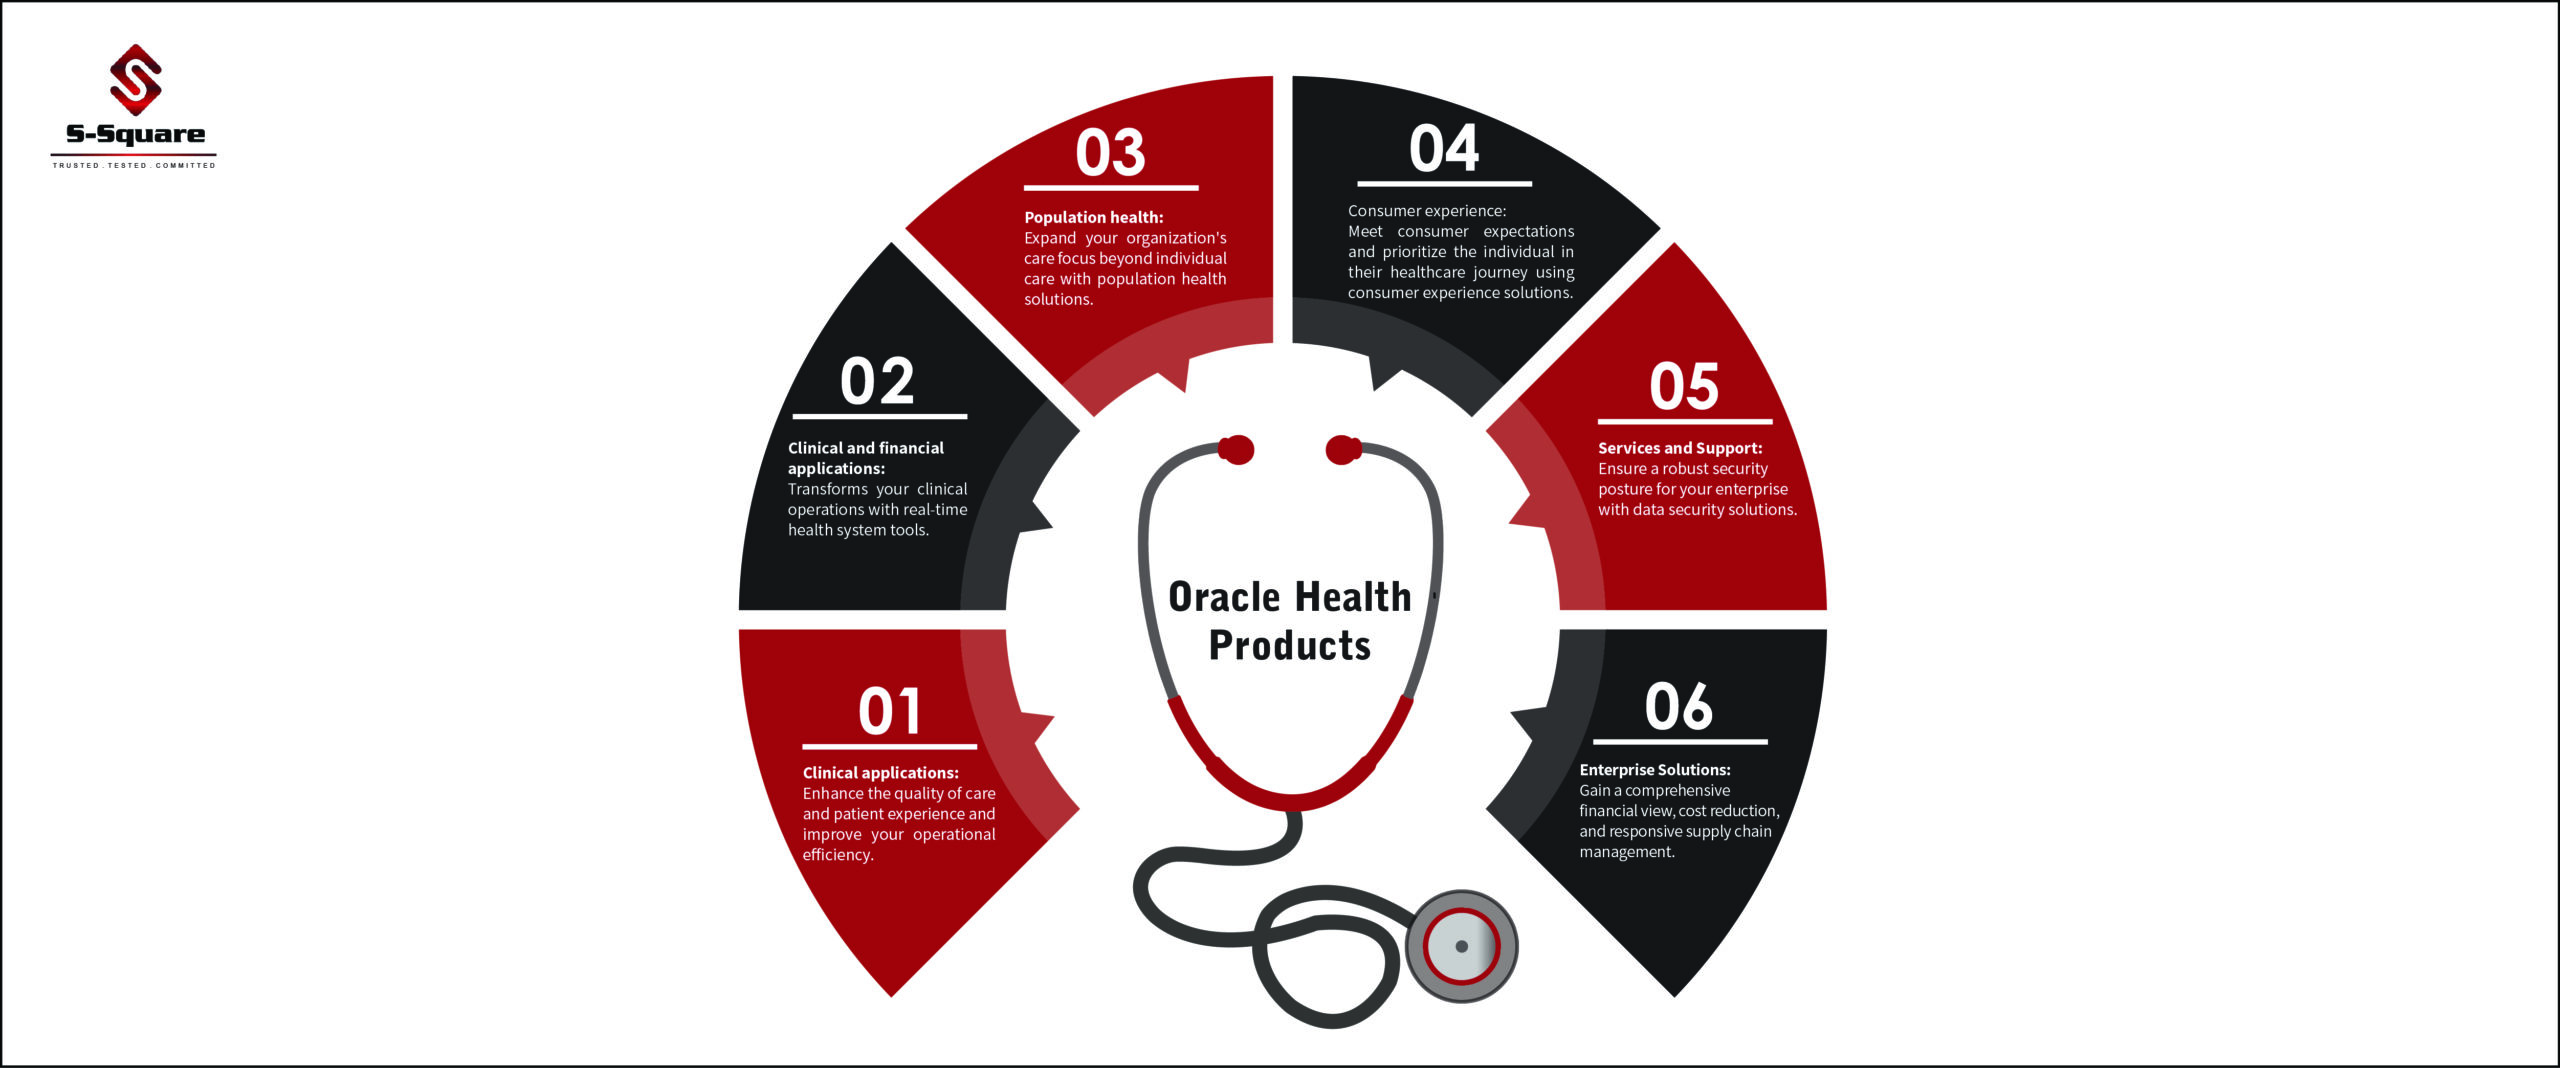 Oracle Health offers six products